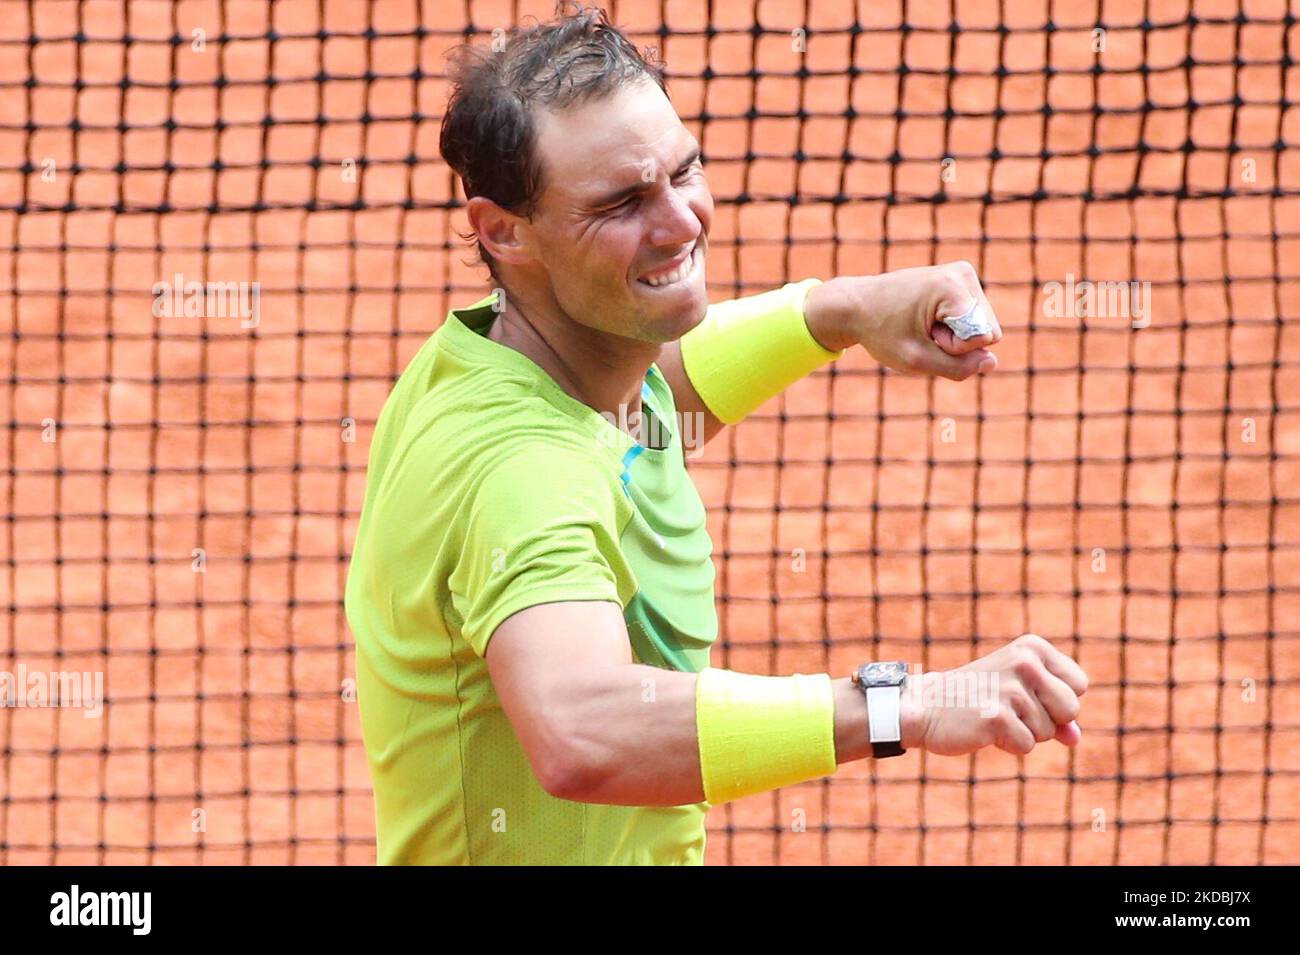 Spain's Rafael Nadal reacts after the match point as he wons against Norway's Casper Ruud on the final tennis match at the Philippe Chatrier court on Day 15 of The Roland Garros 2022 French Open tennis tournament. (Photo by Ibrahim Ezzat/NurPhoto) Stock Photo